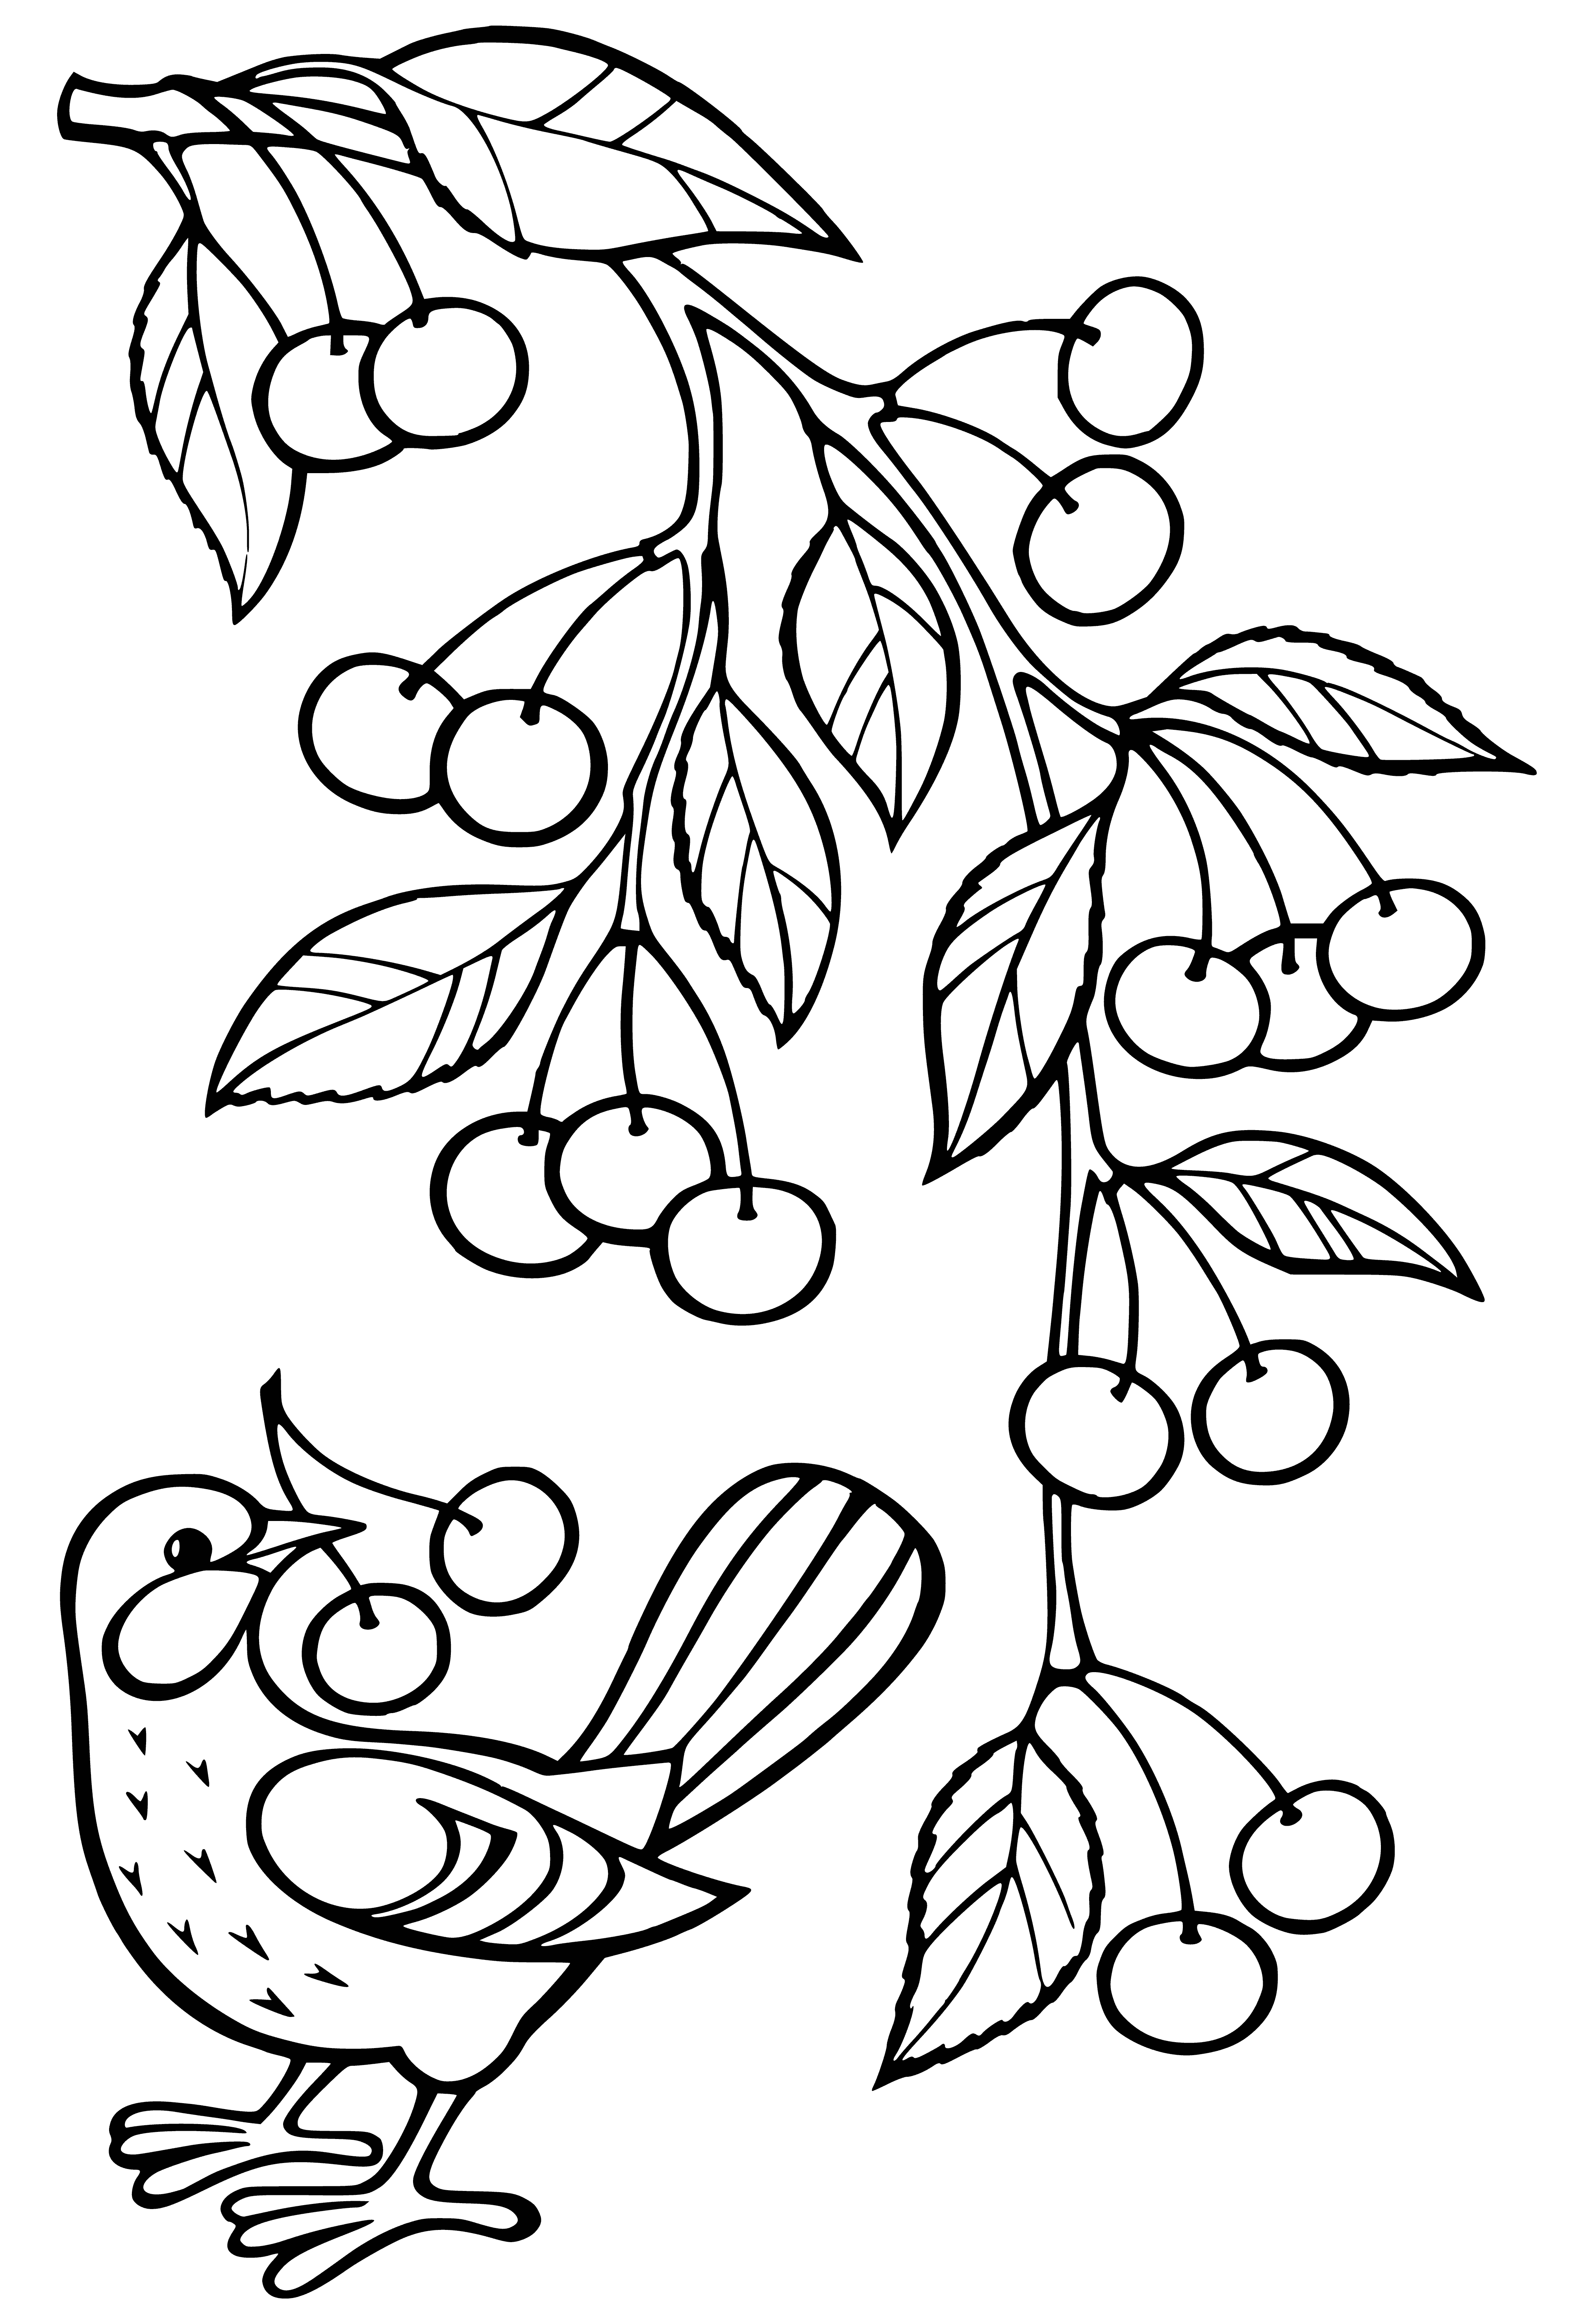 coloring page: A branch with dark red cherries and leaves attached to their stems.